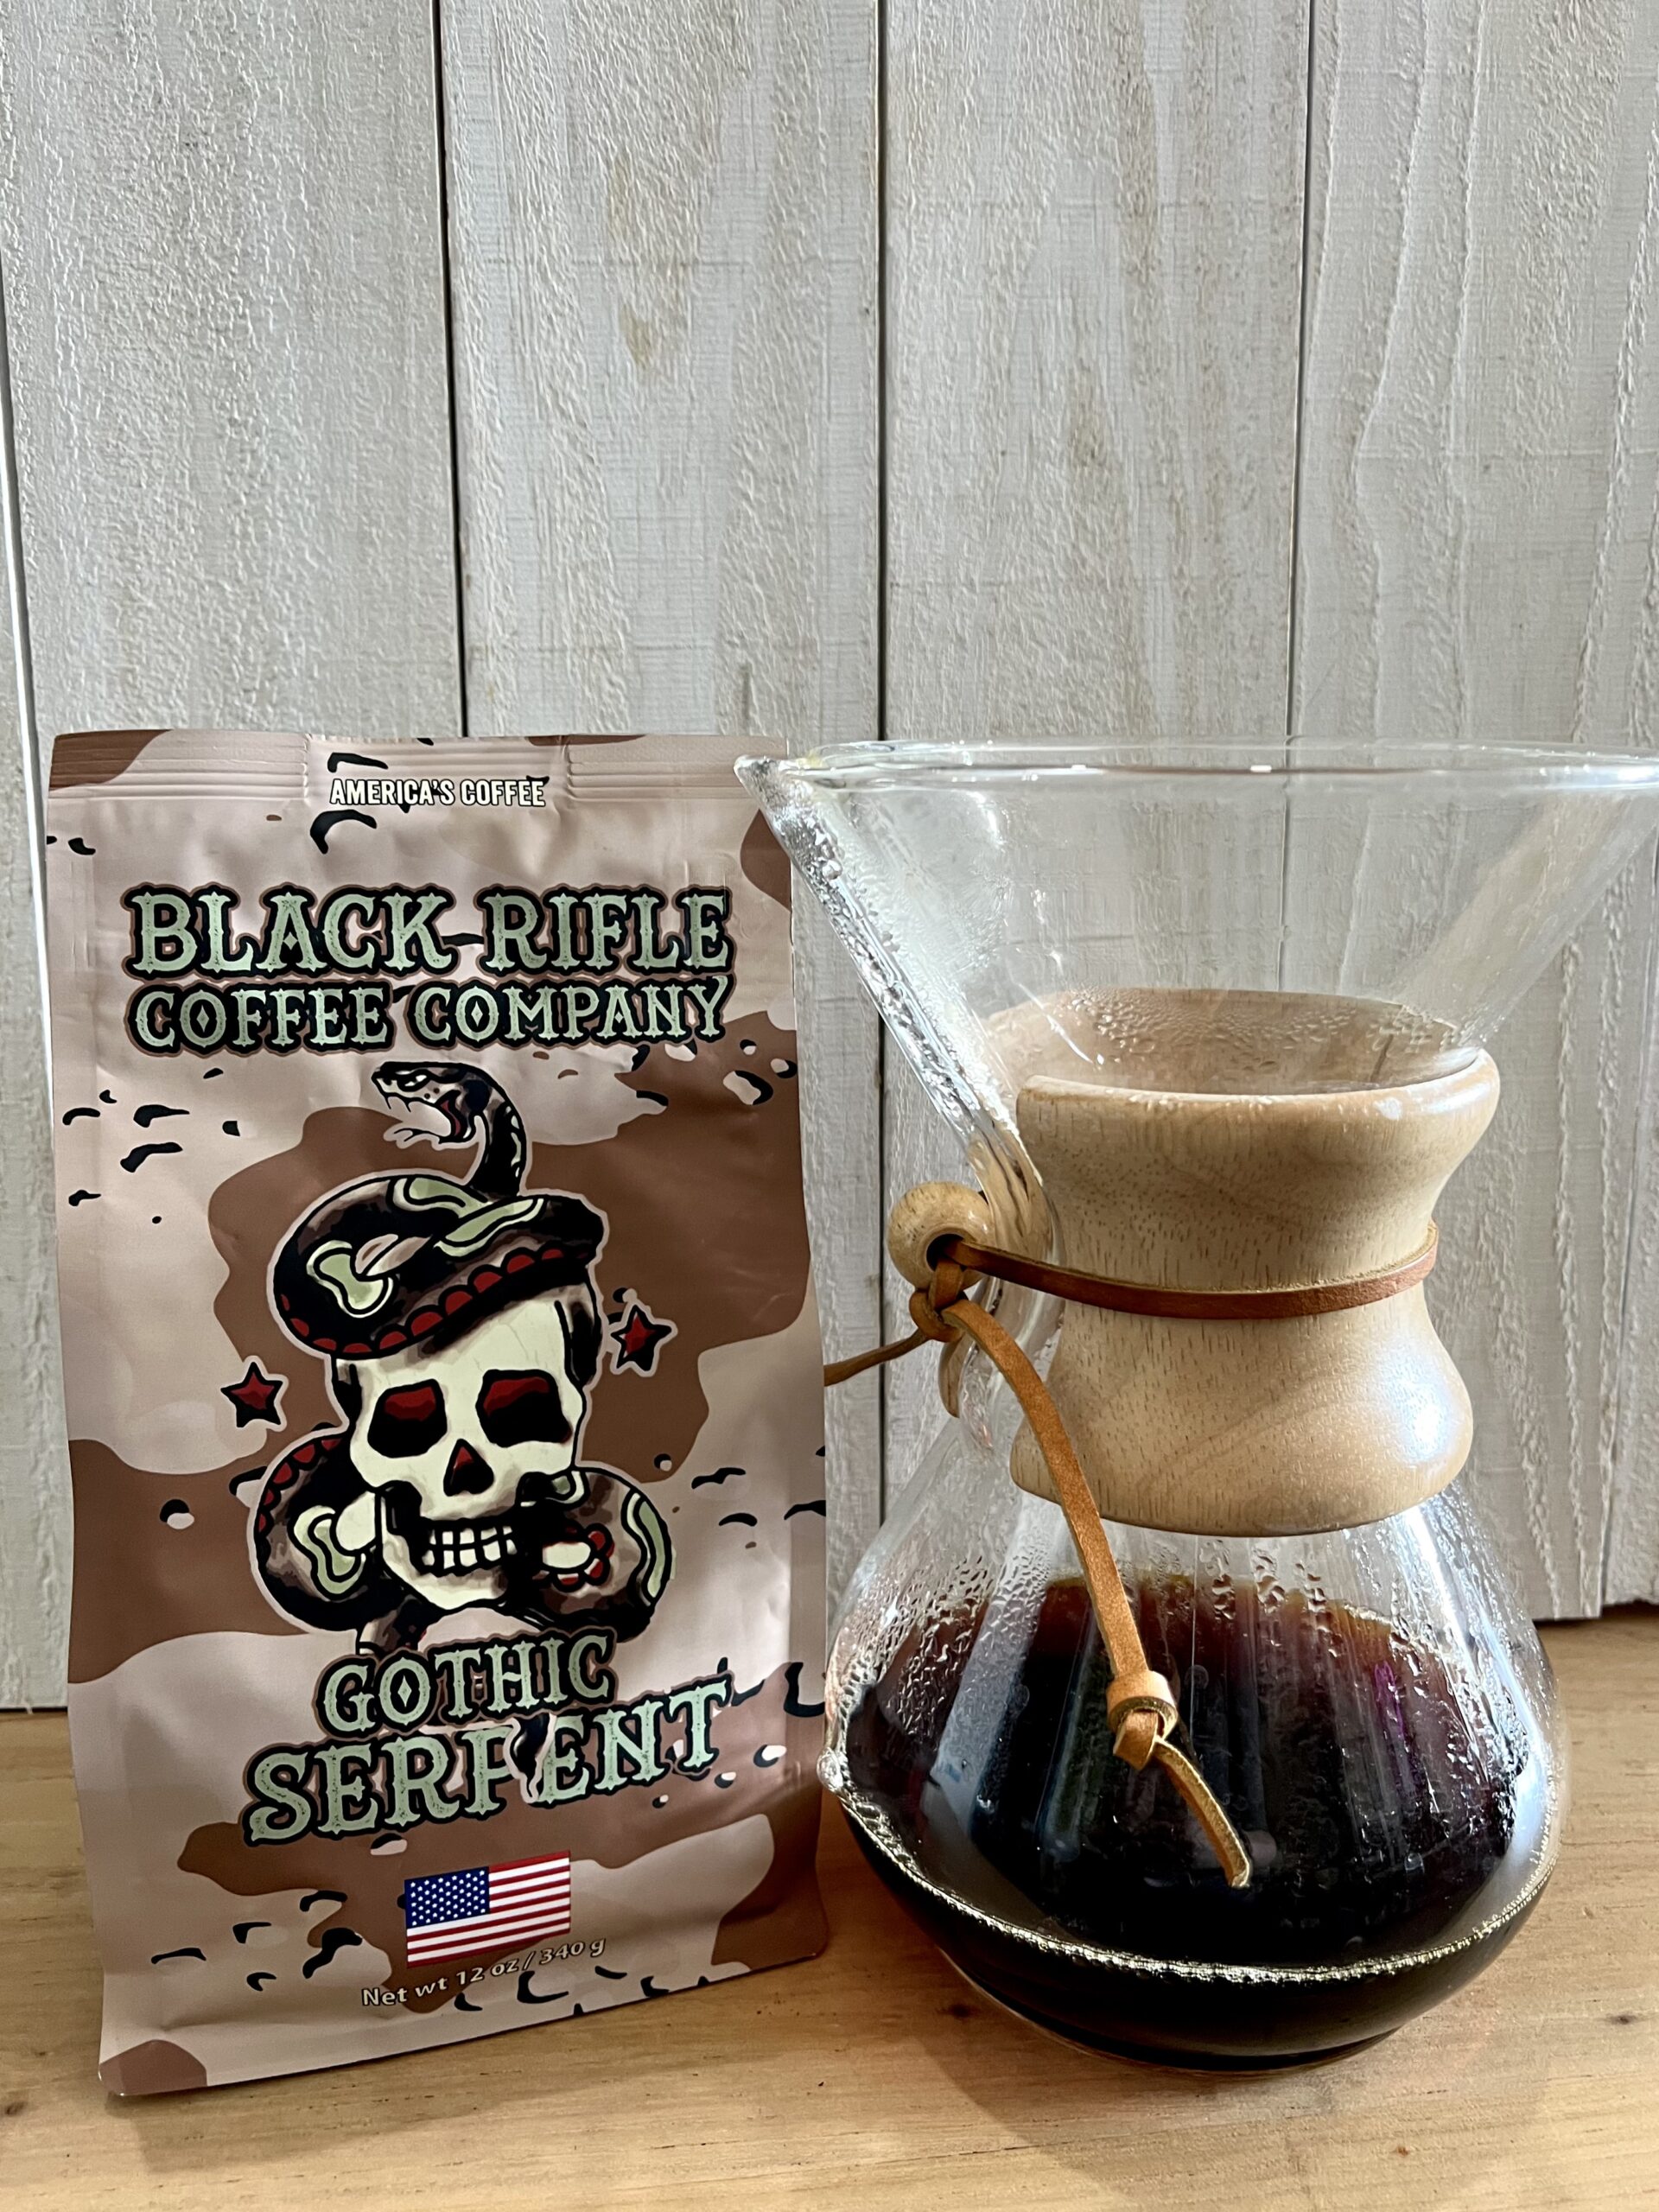 Gothic Serpent Black Rifle Coffee pack next to brewed coffee in Chemex